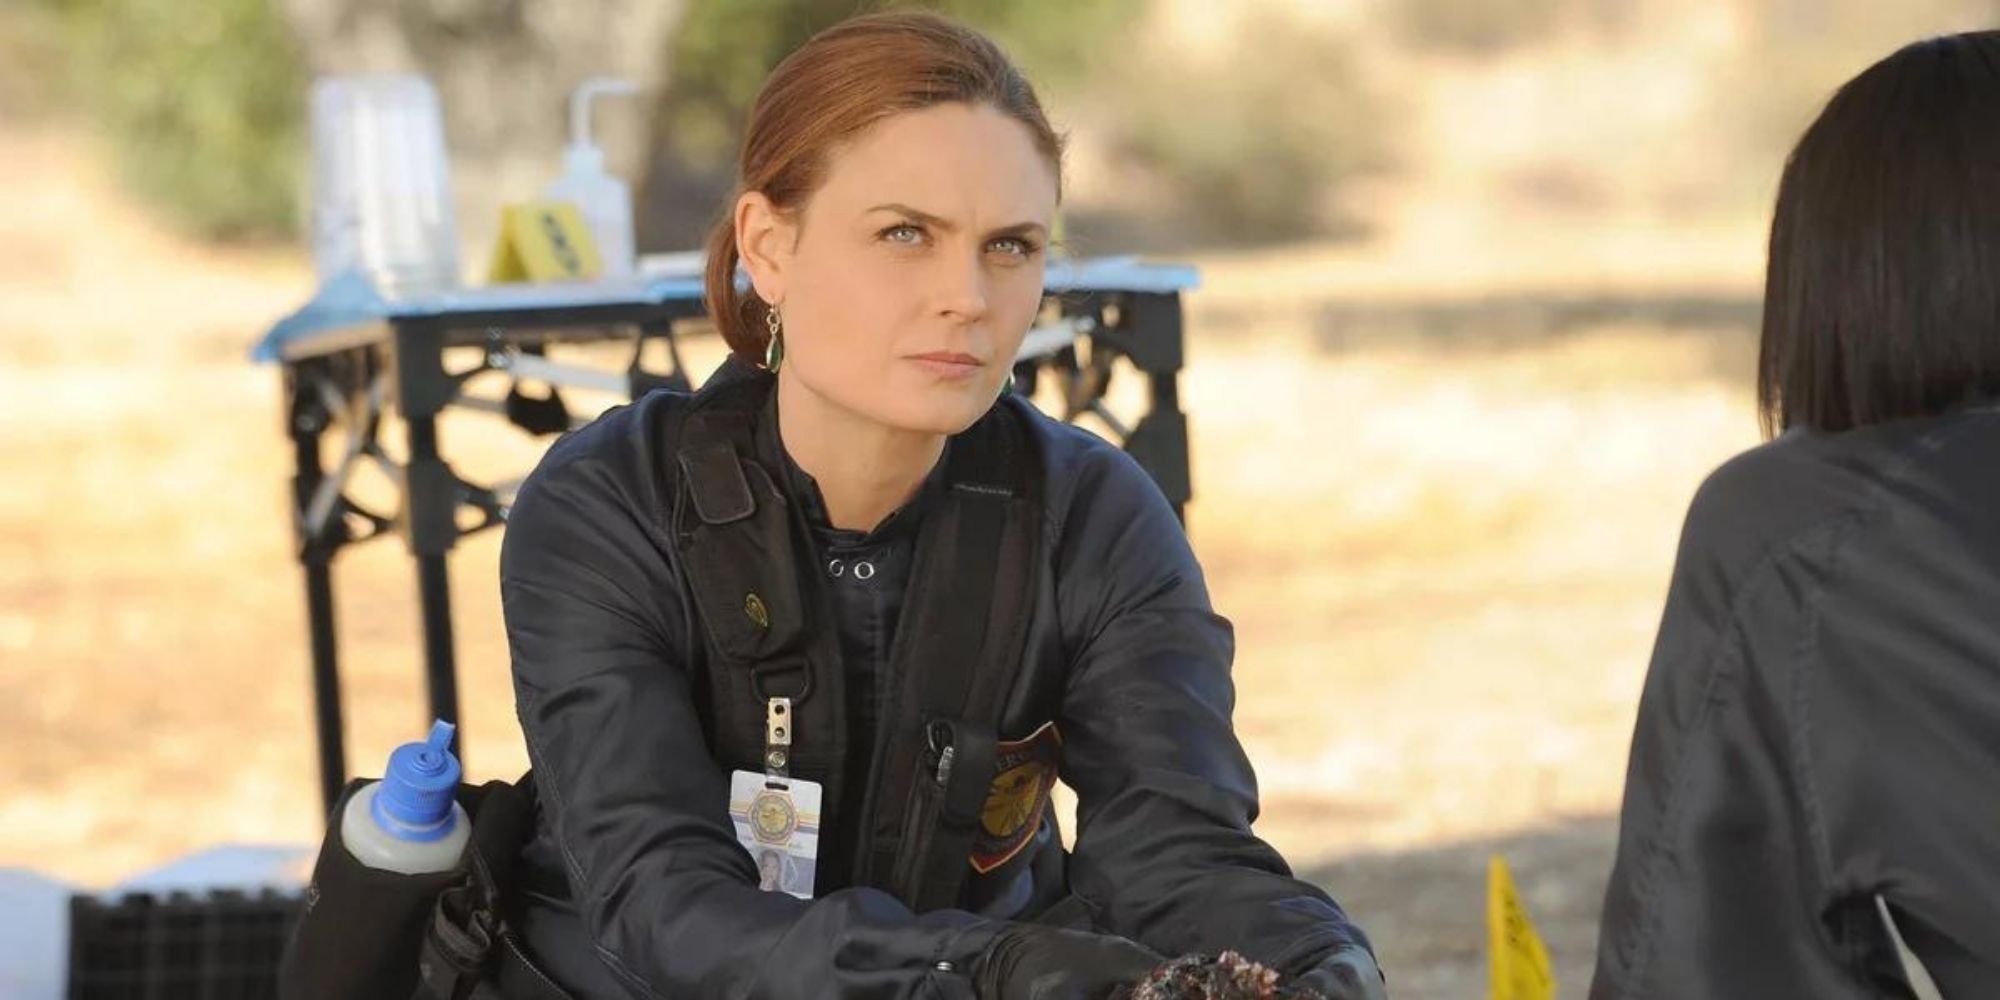 Dr. Temperance Brennan from Bones gazing into space thoughtfully